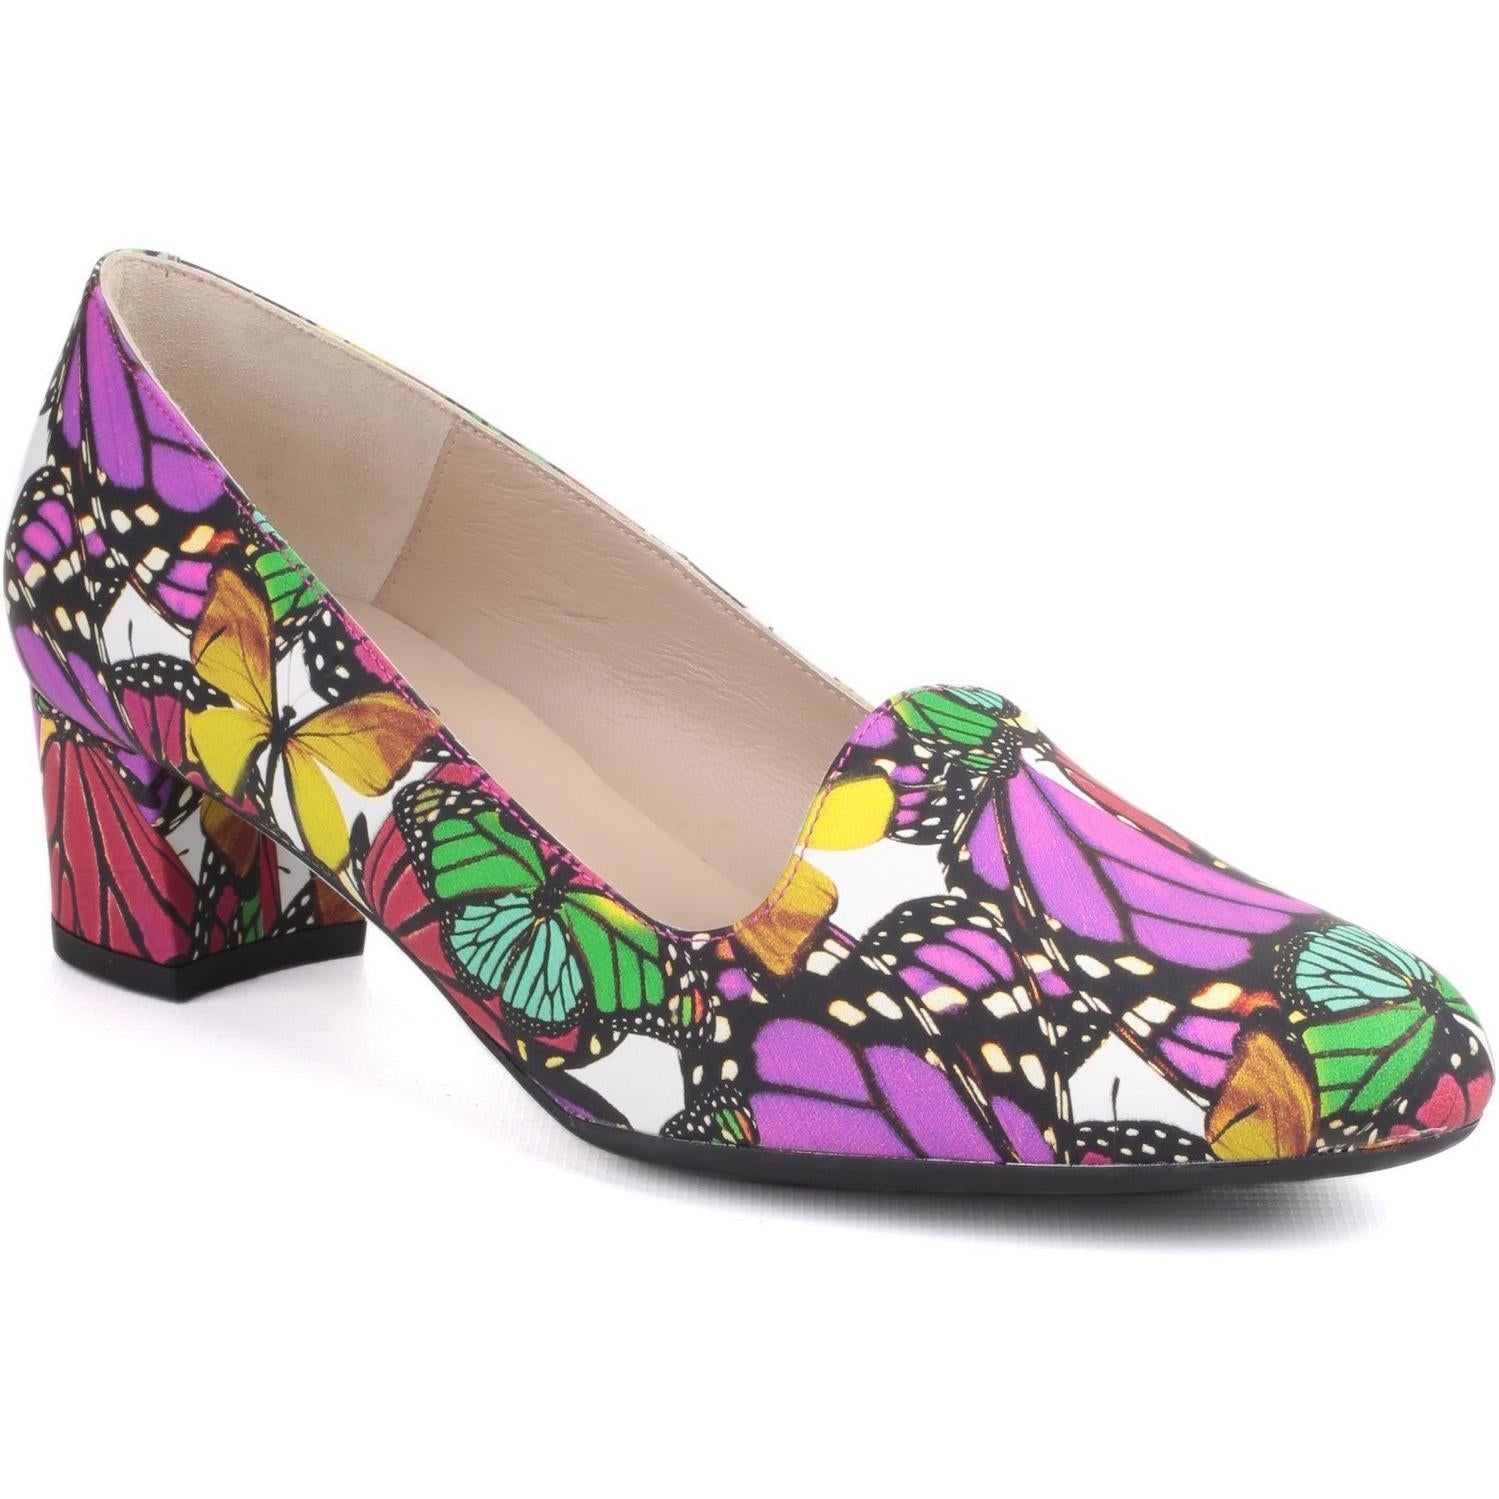 Riva Pizzo Florel Printed Leather Sandals